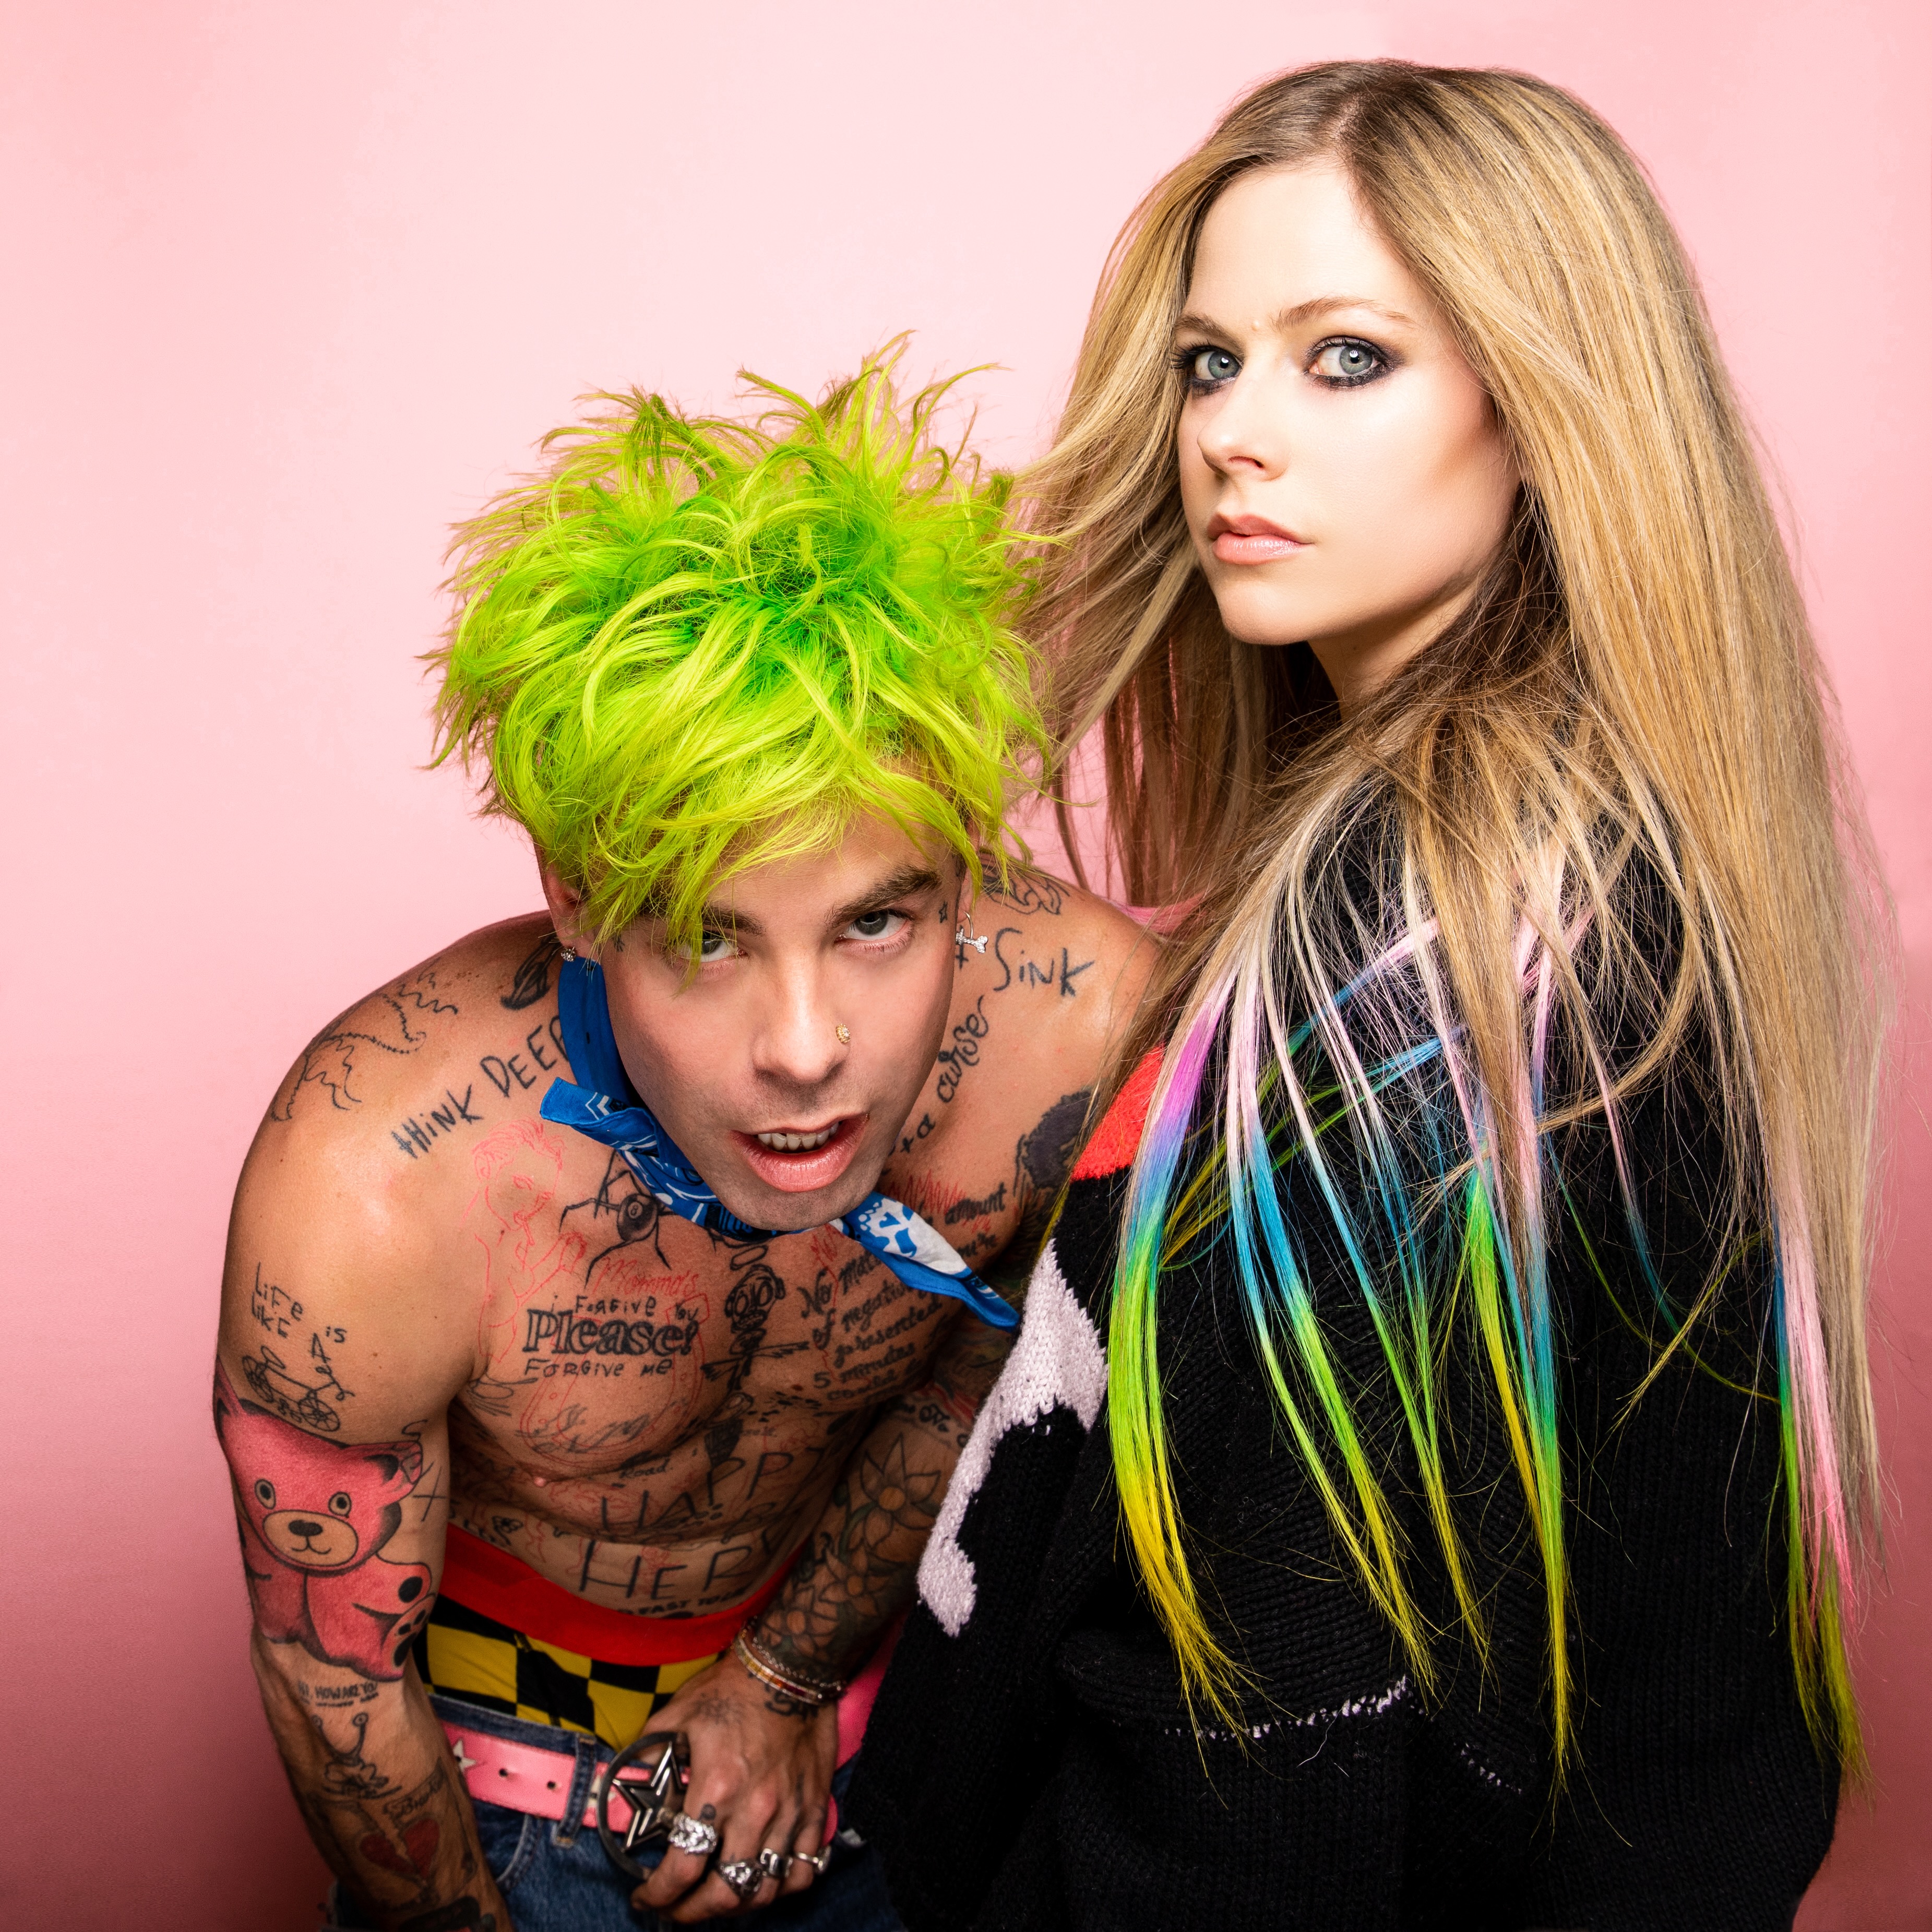 Mod Sun Releases New Music After End of Engagement to Avril Lavigne